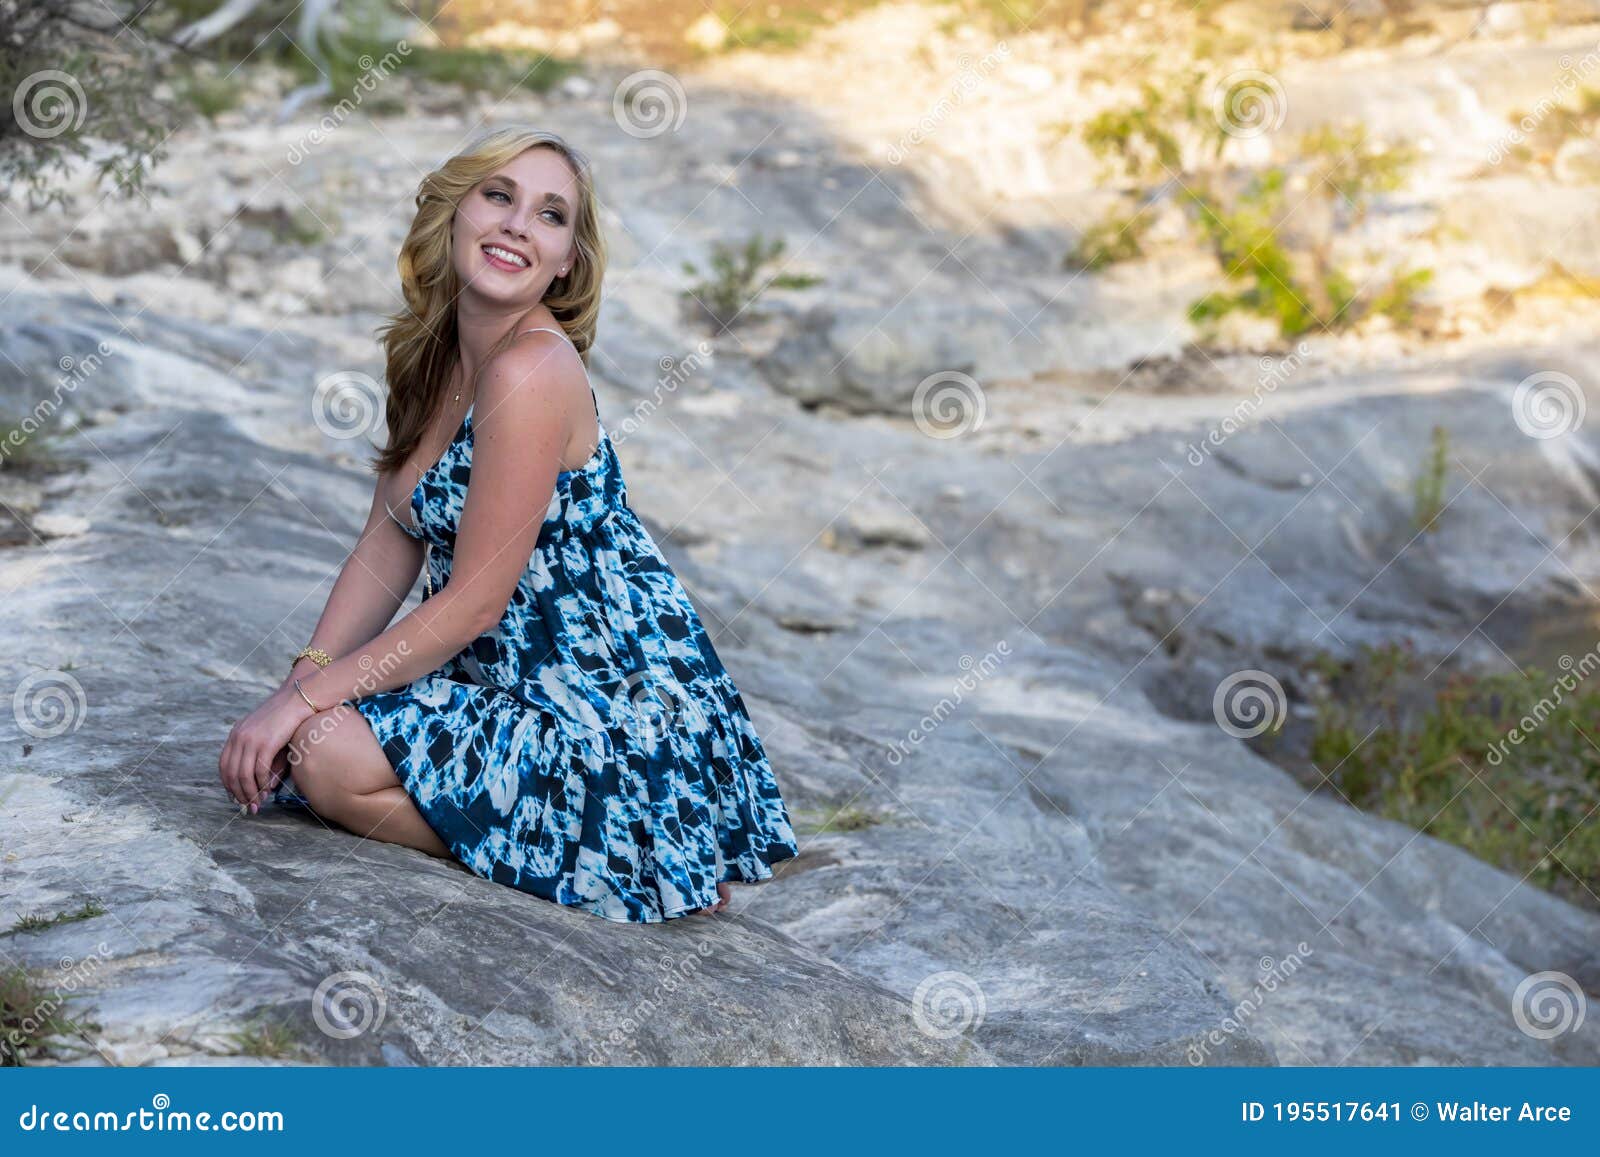 A Lovely Blonde Model Enjoys A Summers Day Outdoors At The Park Stock Image Image Of Elegant